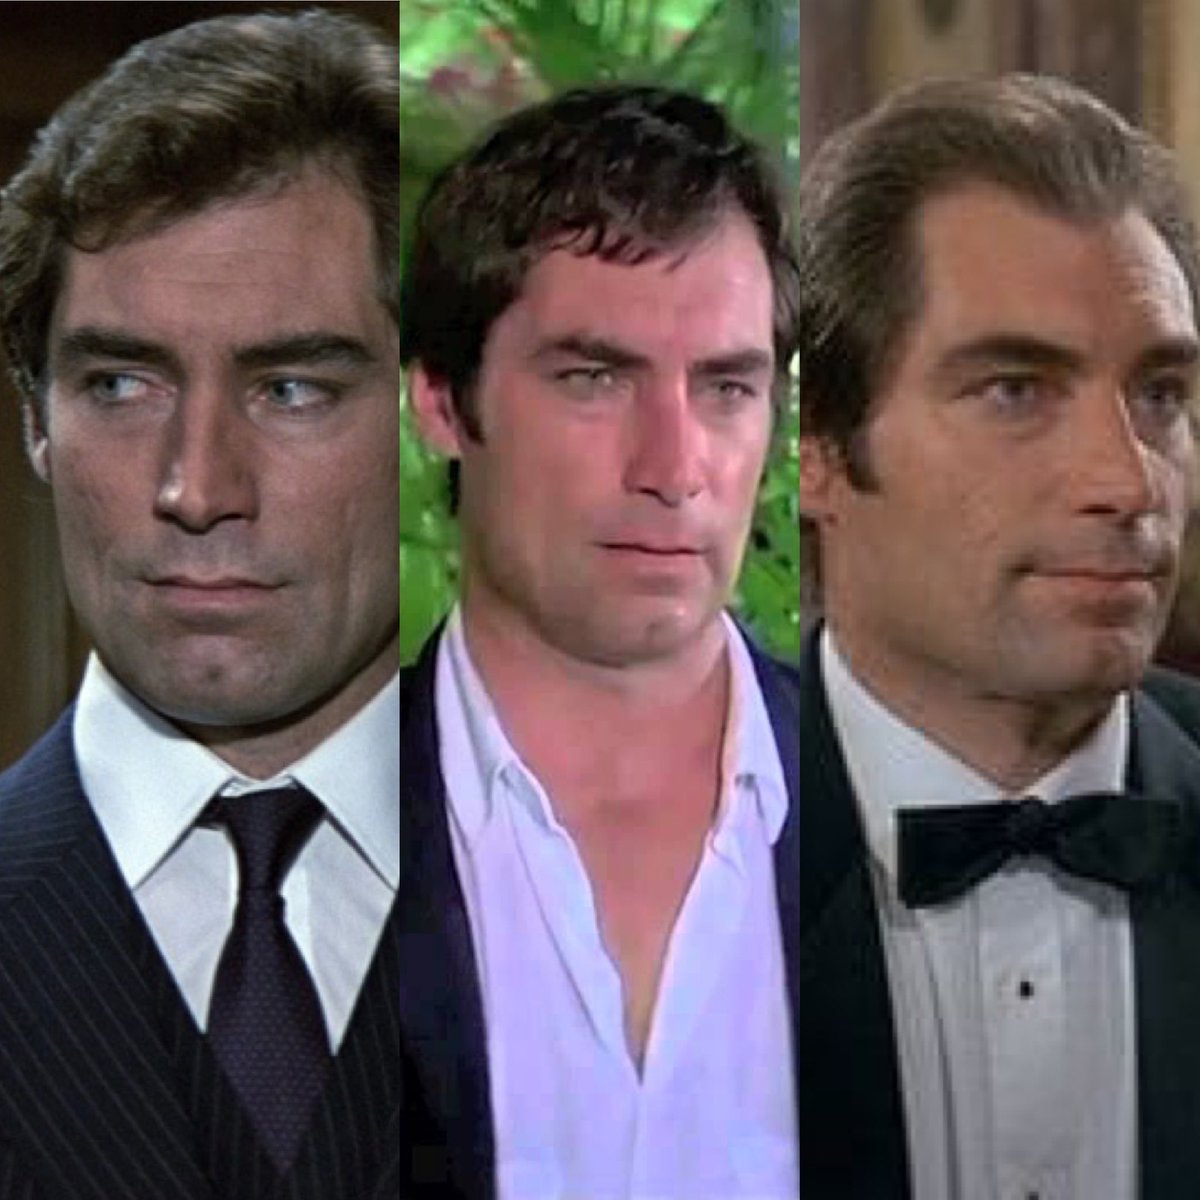 Which is your favourite #TimothyDalton hairstyle: sideways, forwards, or back? #80sHair #Bond #JamesBond #ForBondFansOnly